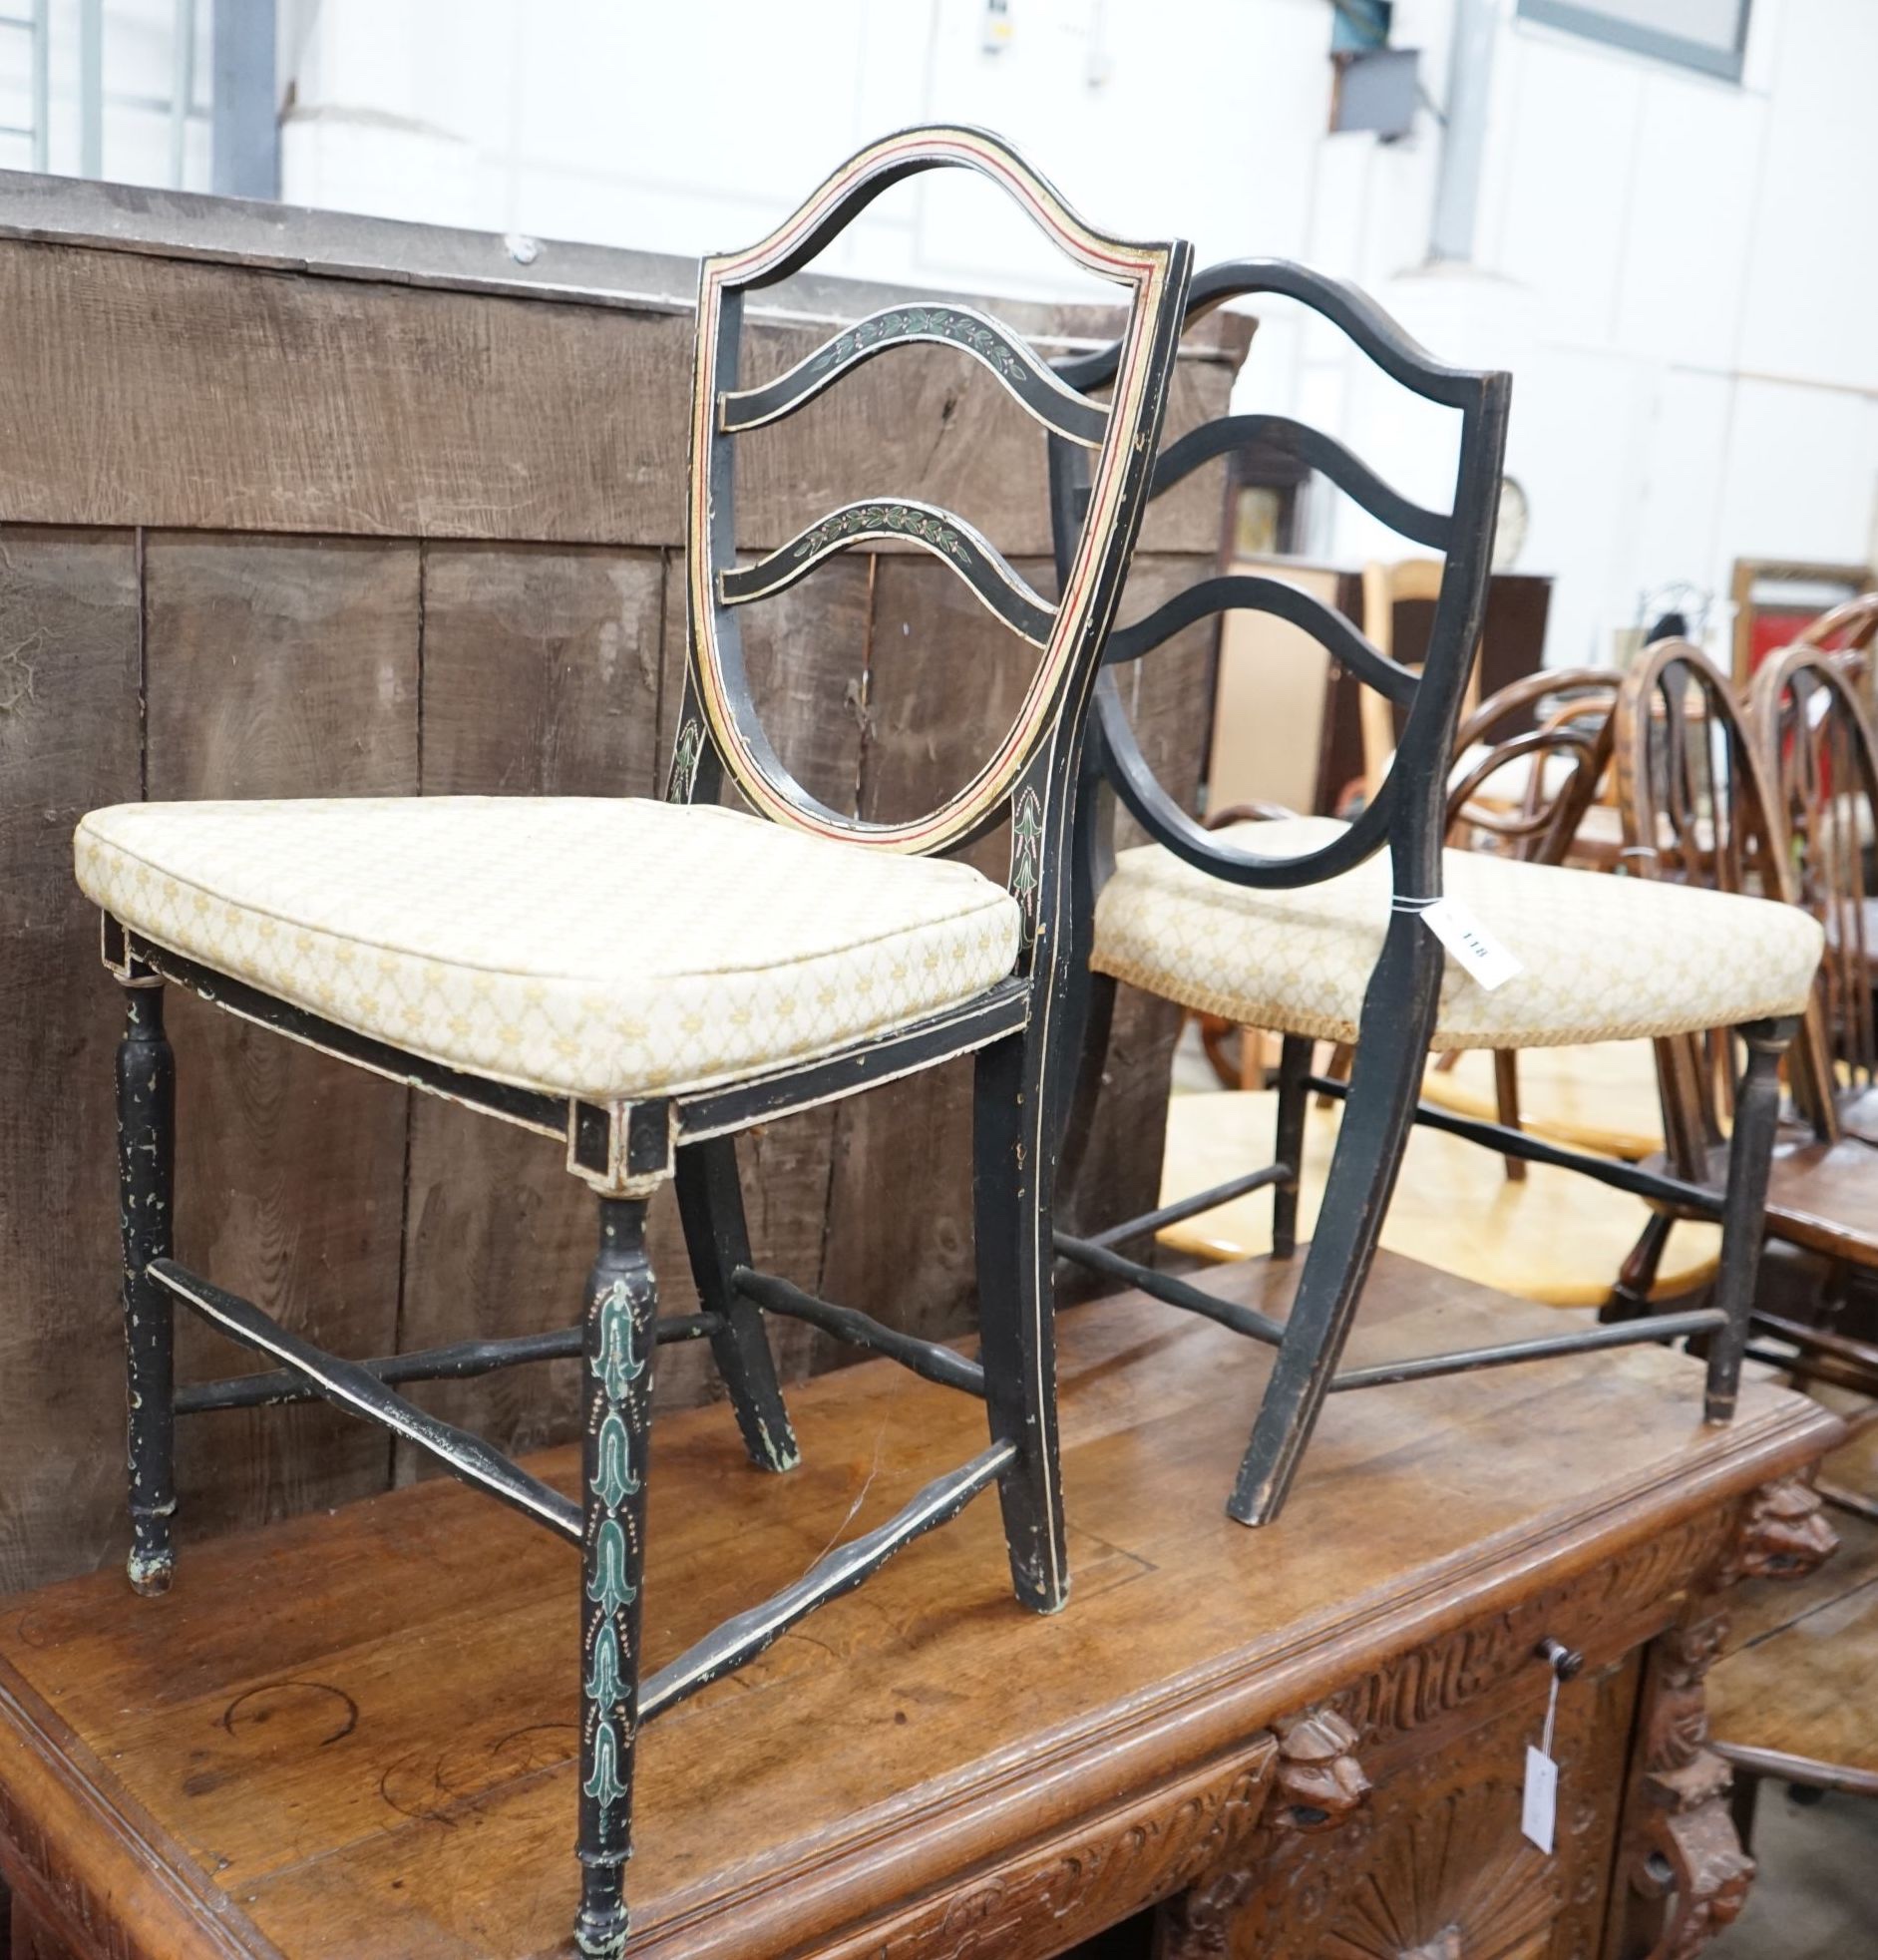 A George III provincial painted cane seat chair and another